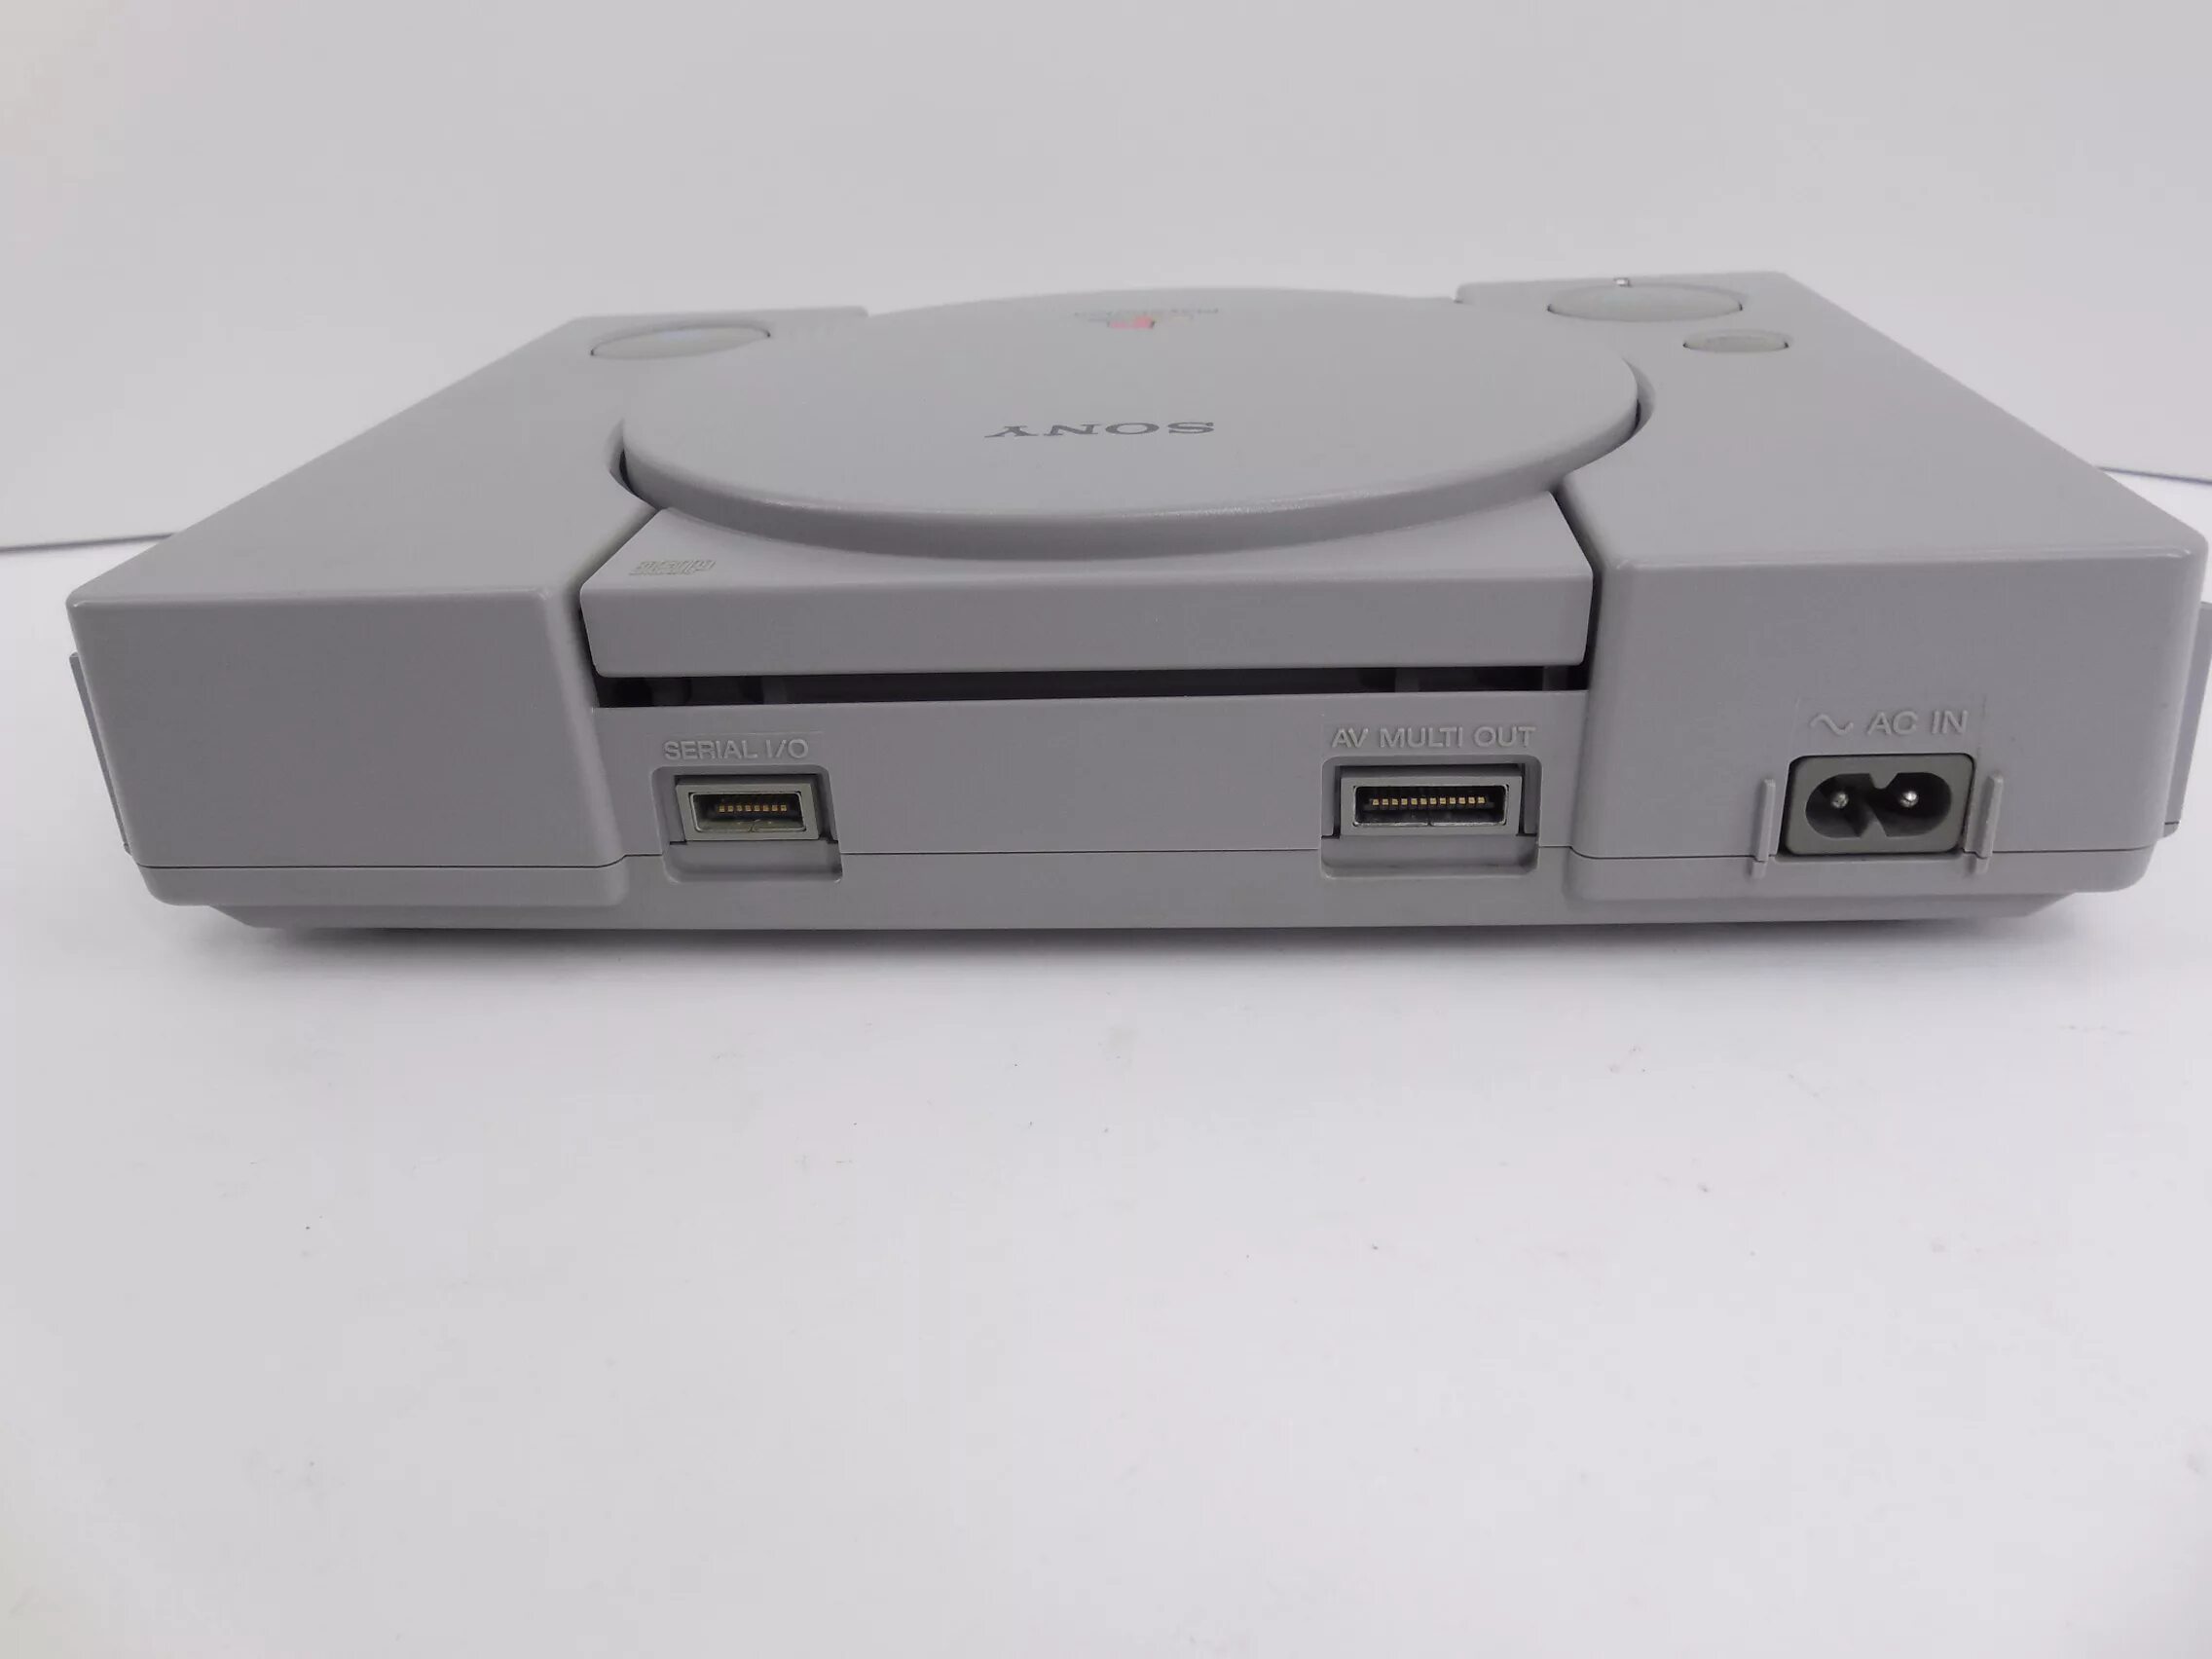 Playstation ps1. Sony ps1. Sony ps1 Slim. Сони плейстейшен 1. PLAYSTATION 1 SCPH-9002.